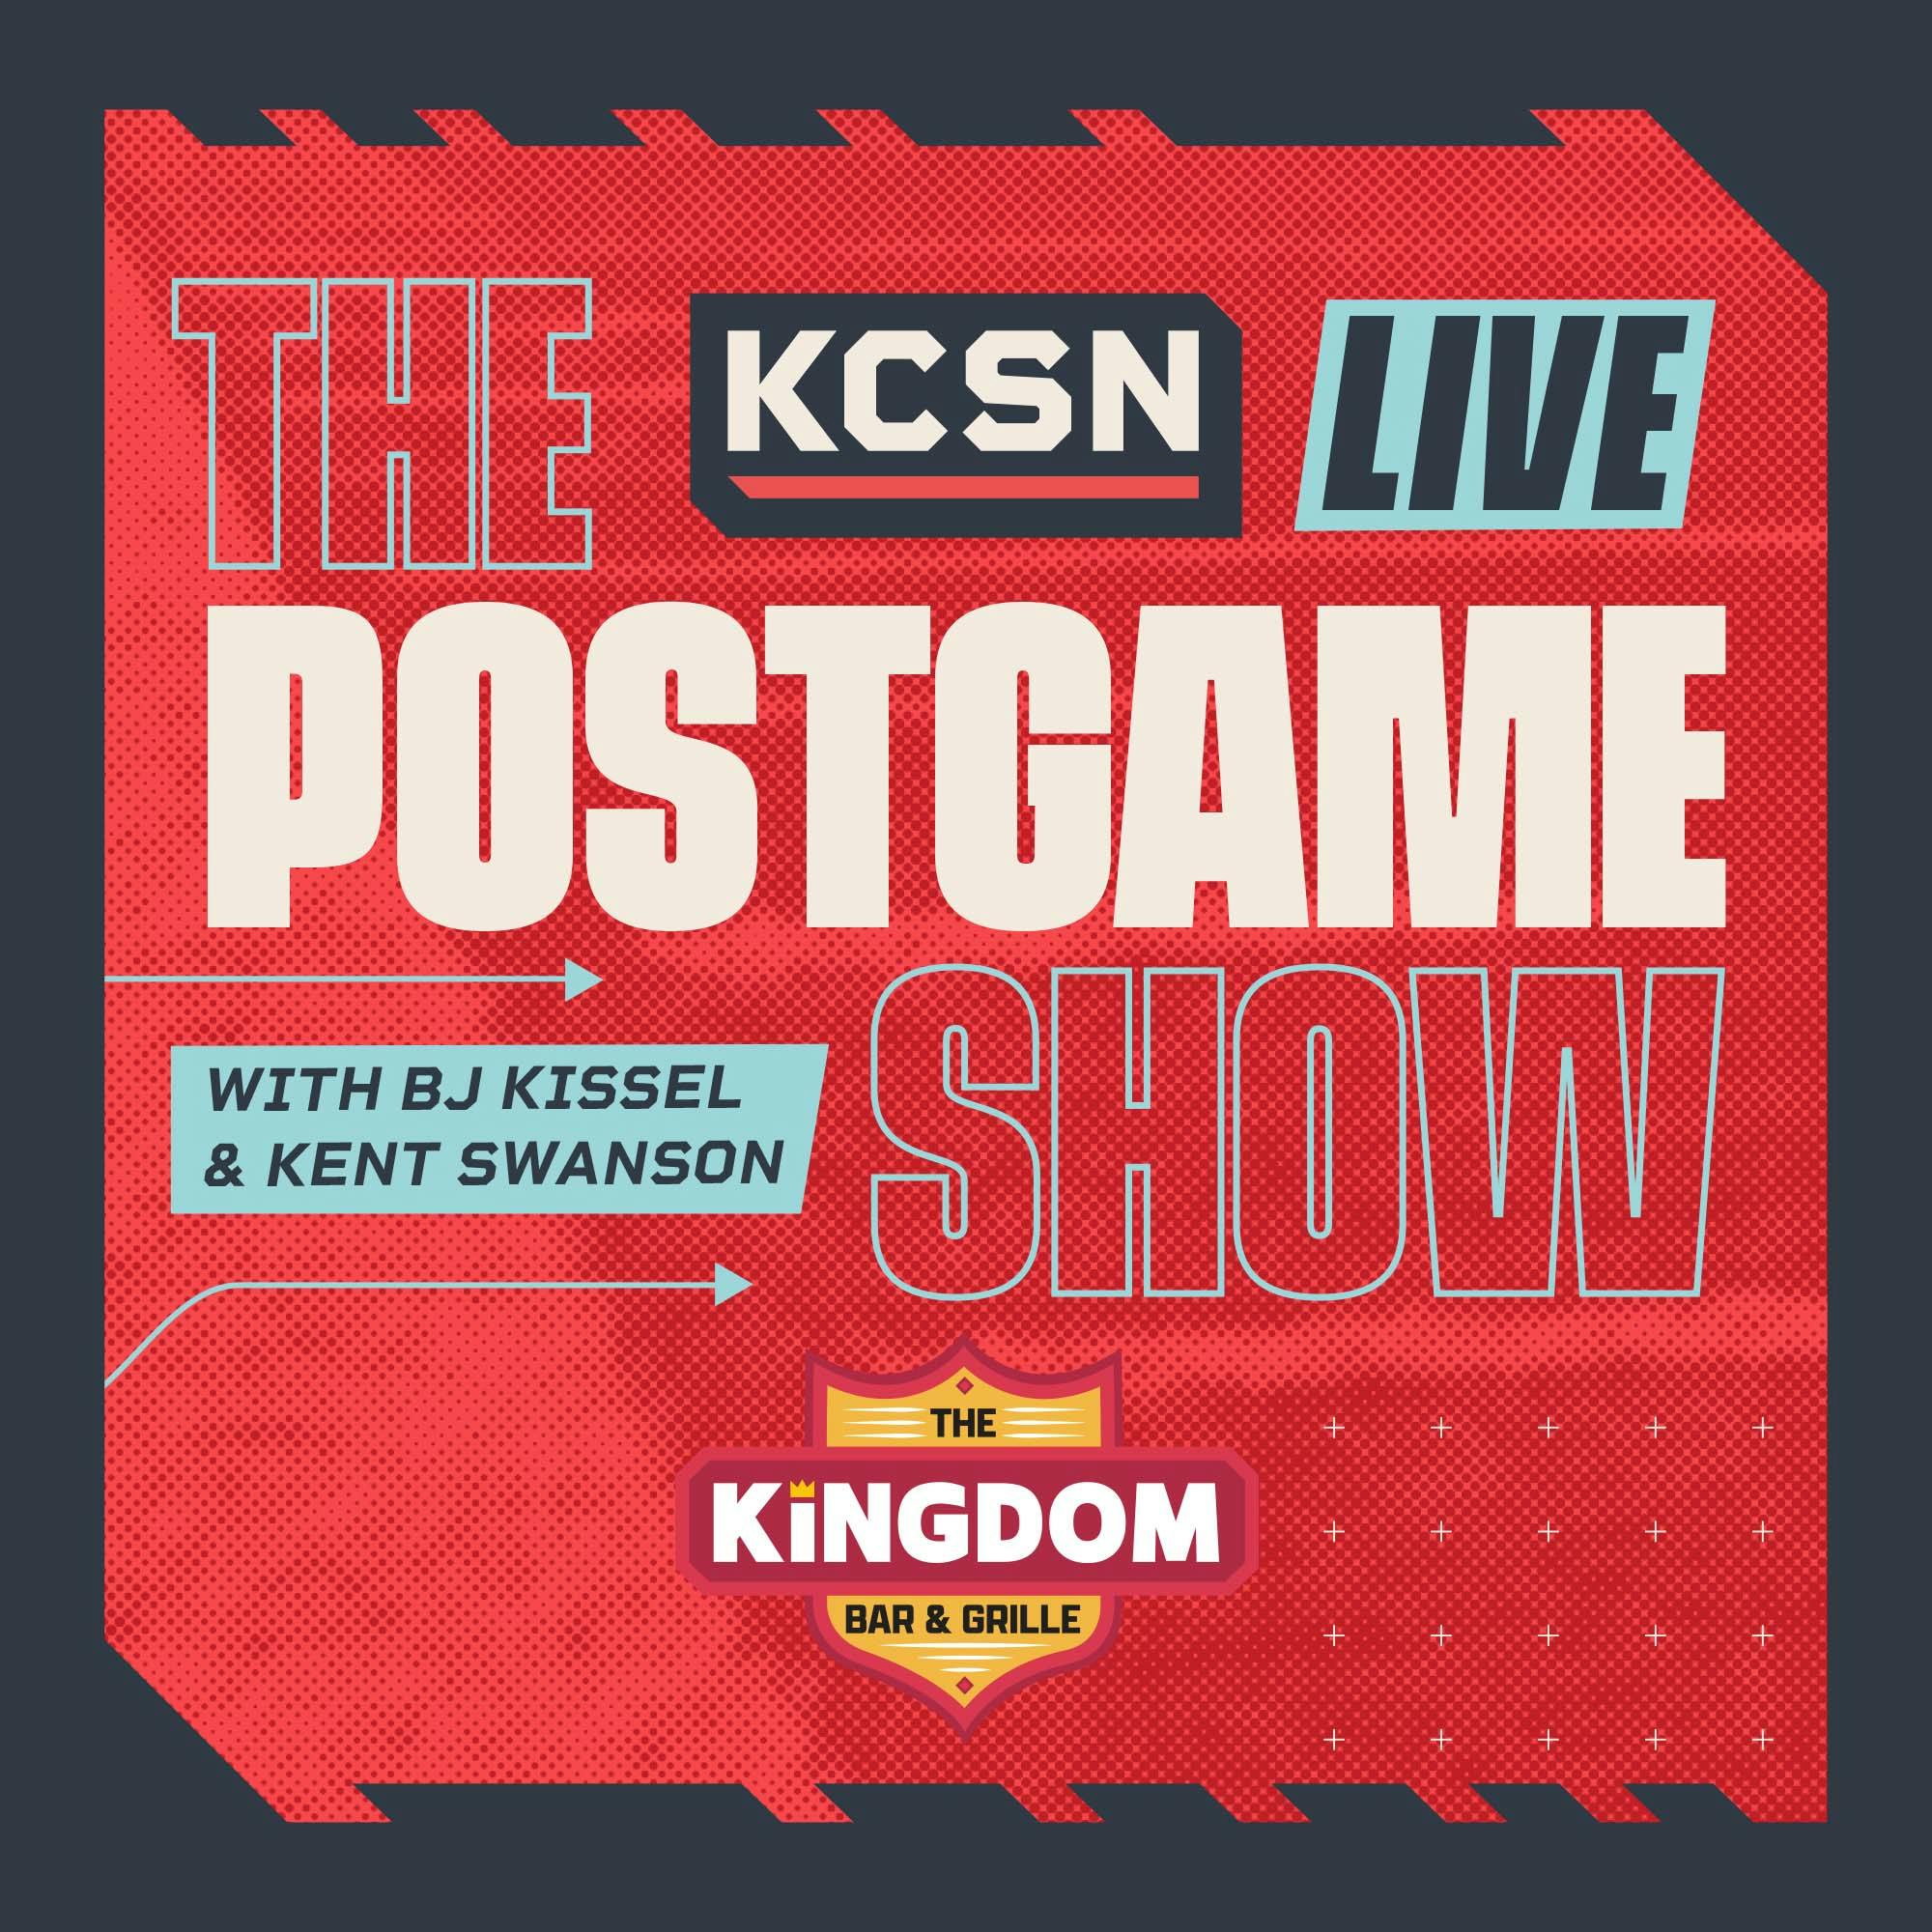 Chiefs Cruise to Easy Christmas Eve Win Over Seahawks | KCSN Live Postgame Show 12/24